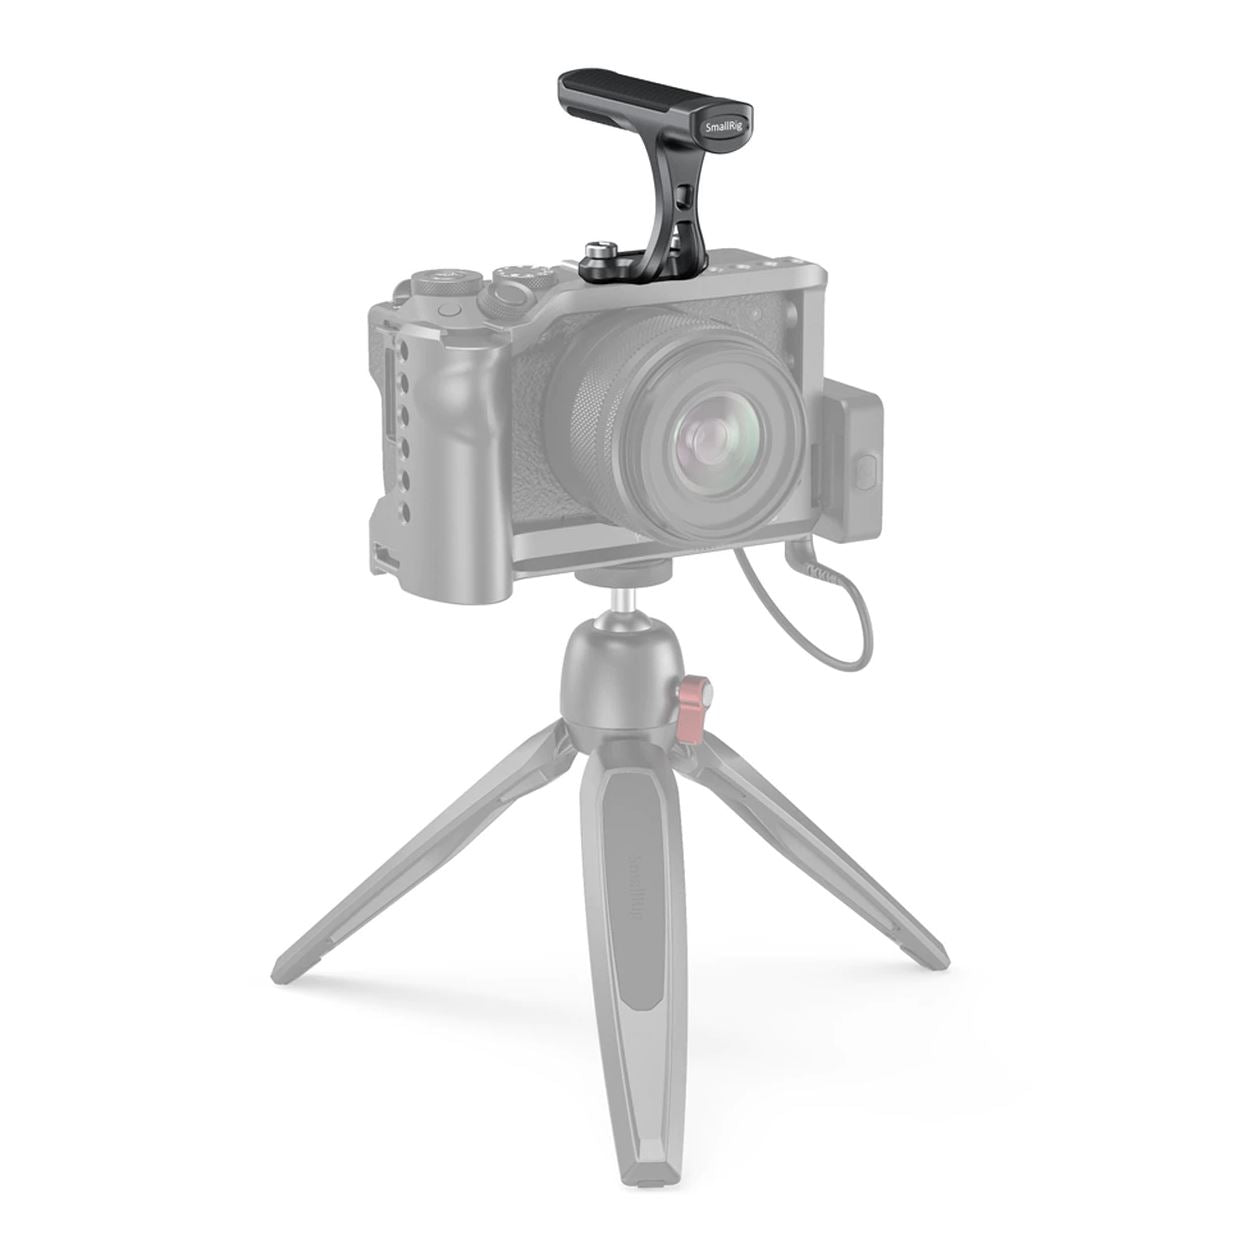 SmallRig 2821B Super Mini Top Handle for Lightweight DSLR Cameras with Locating Pin Base